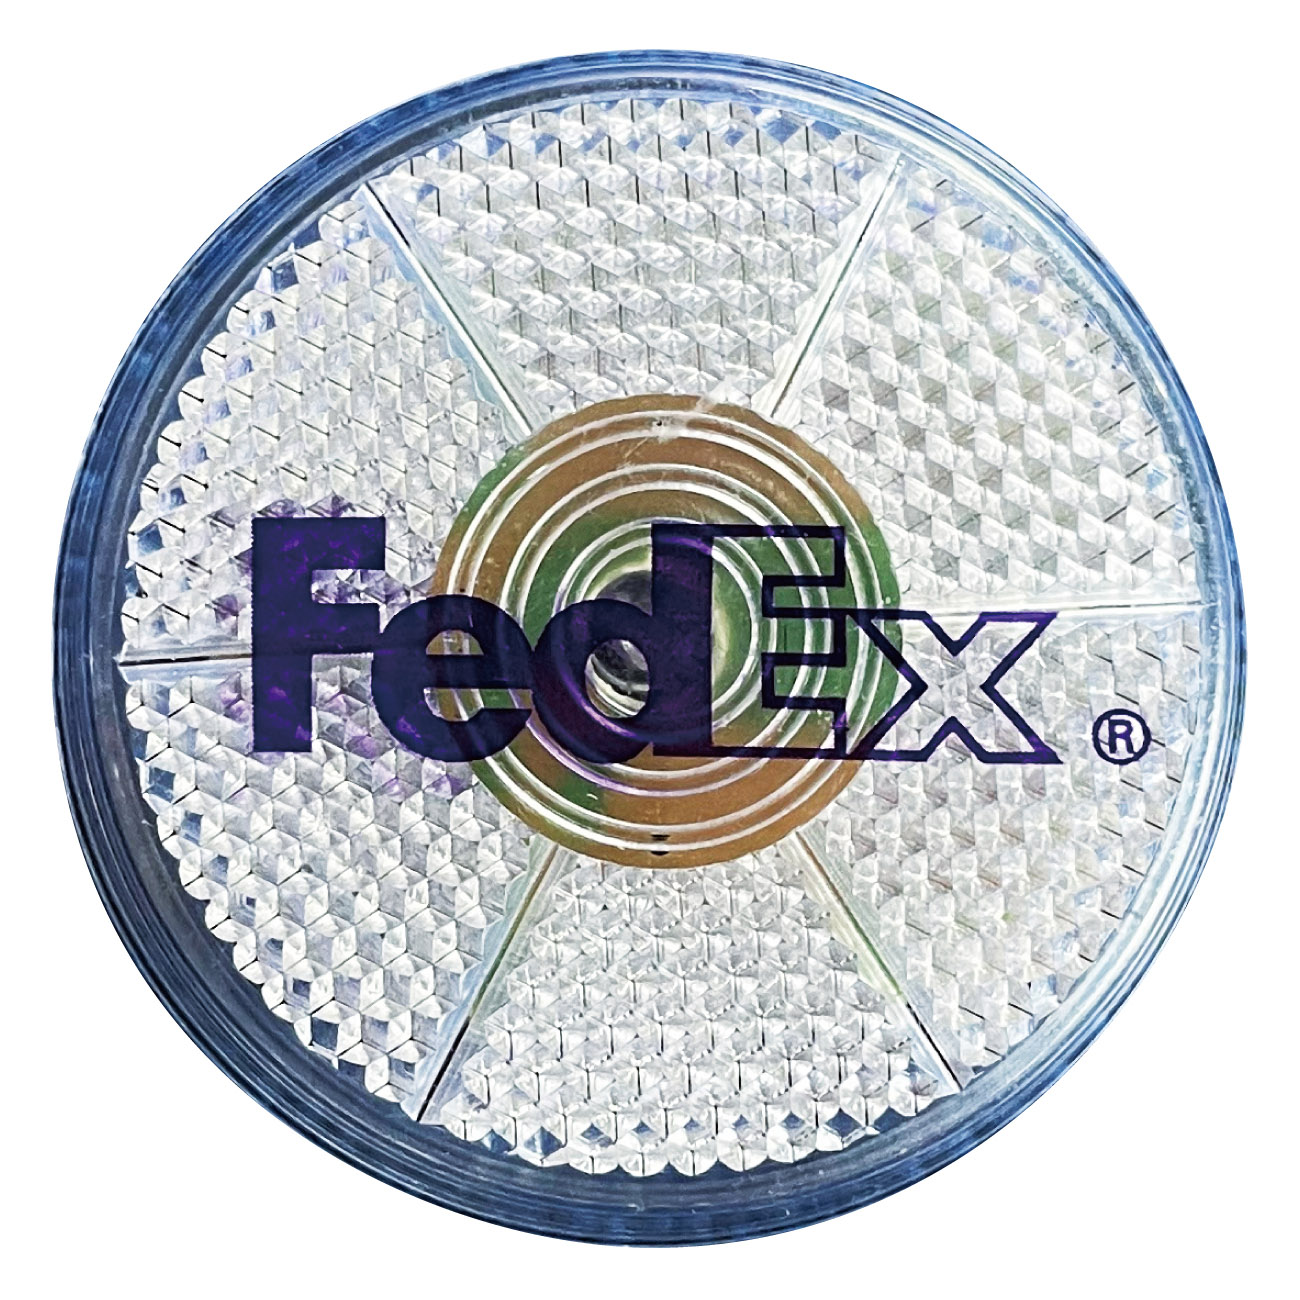 FedEx CURCLE SAFETY FLASHER　フェデックス